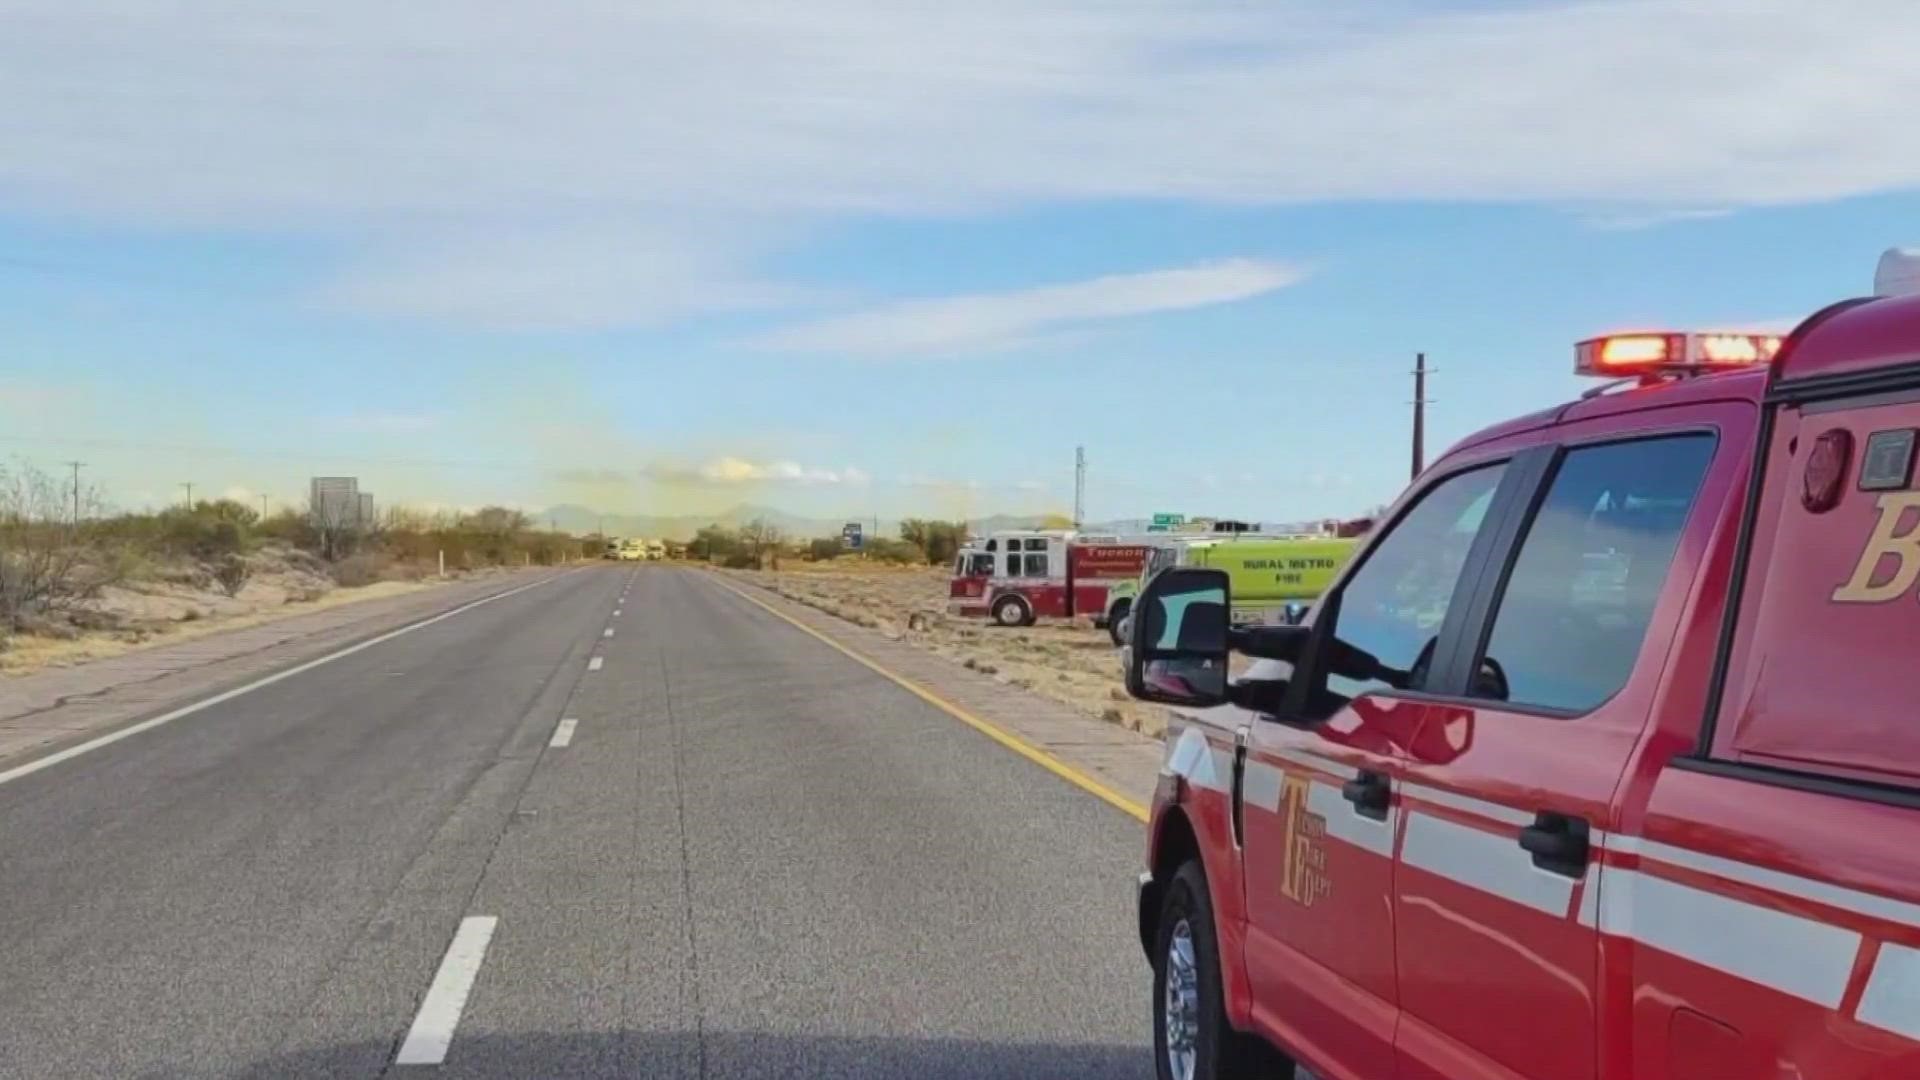 A truck filled with nitric acid crashed just outside of the Tucson area on Tuesday, Feb. 14.